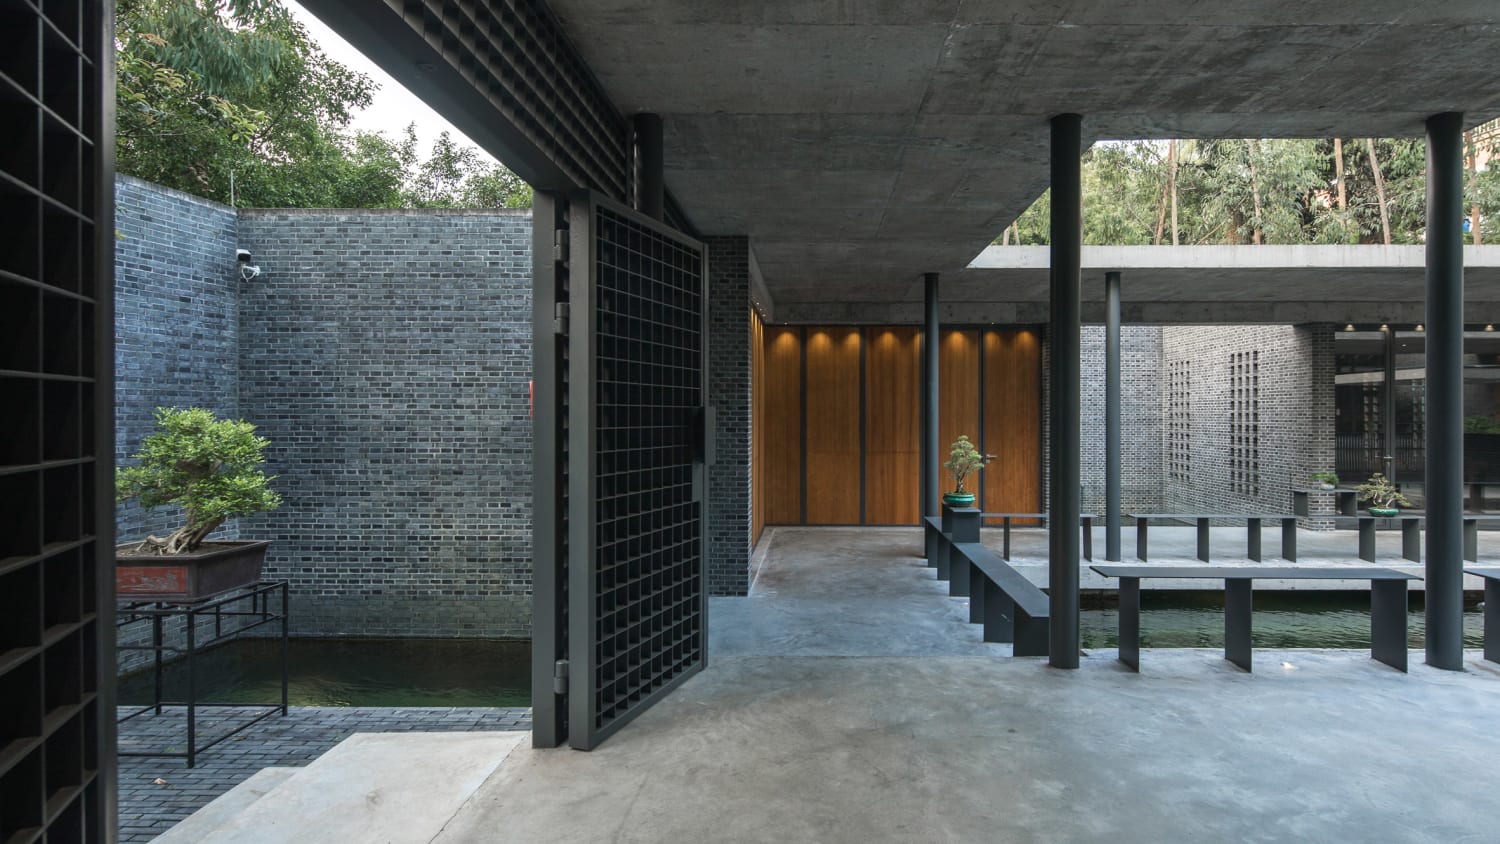 O-office Architects reinterprets traditional Chinese courtyard house in concrete and steel